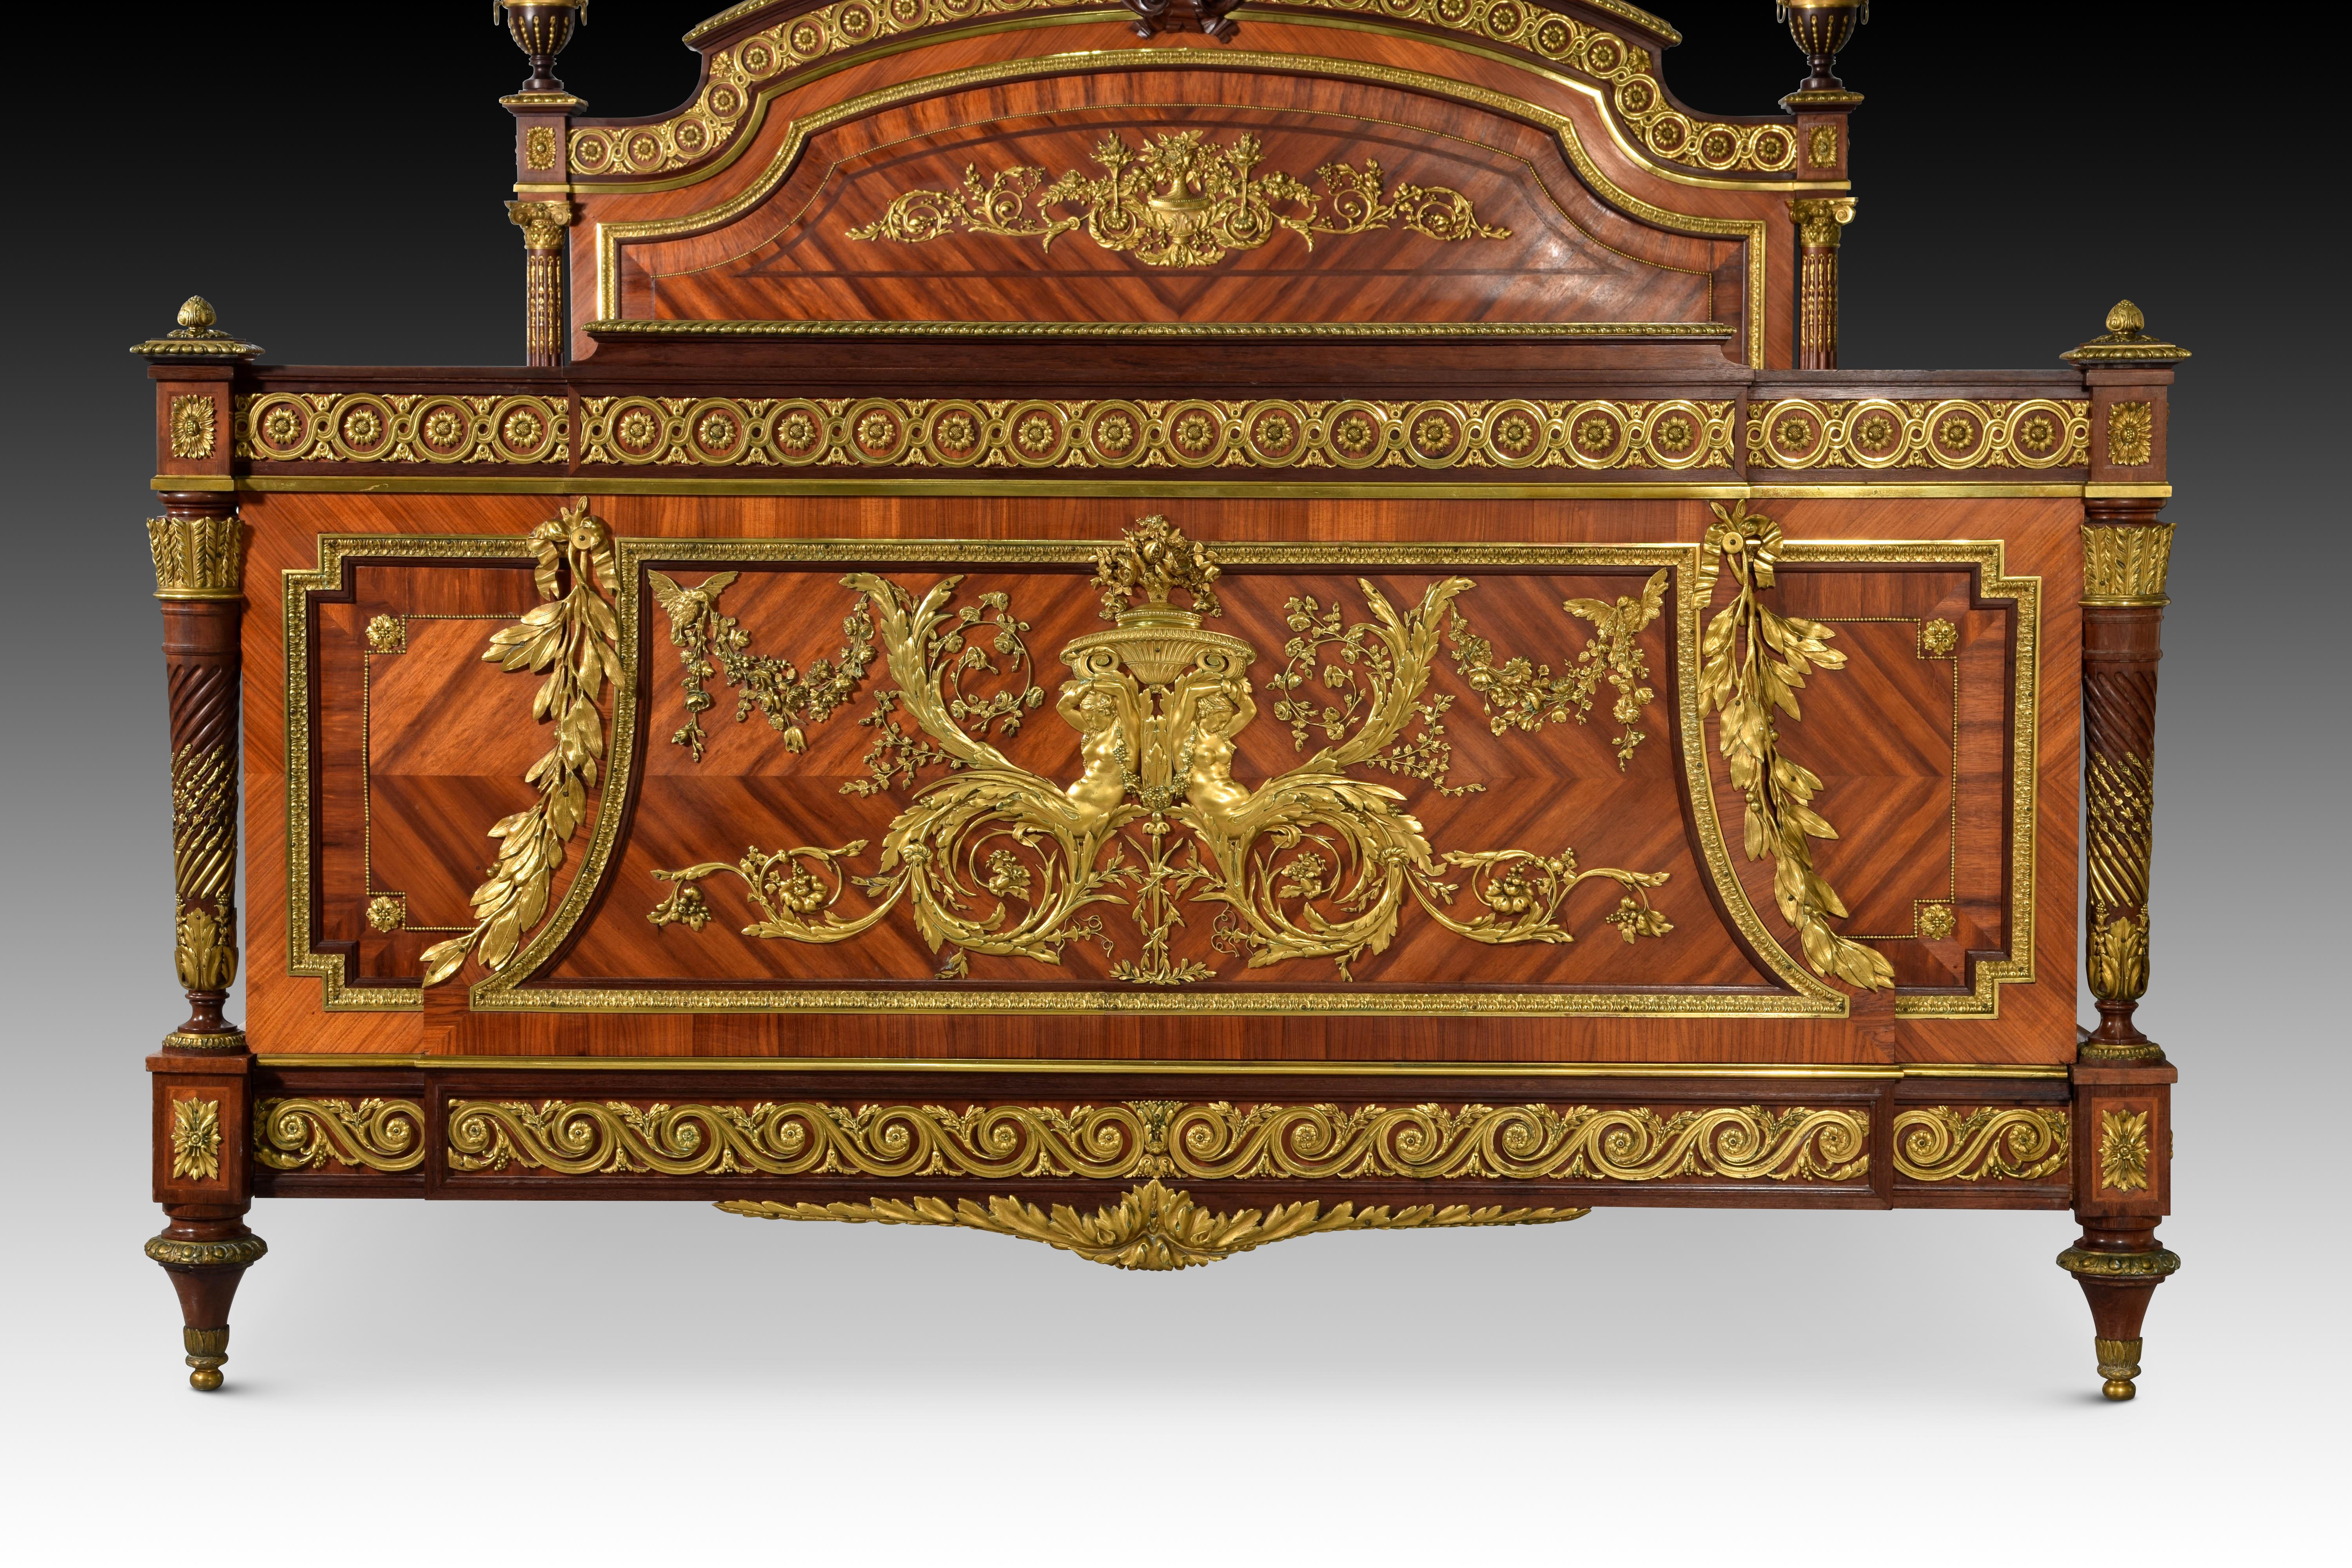 Neoclassical Revival Bed. Wood, gilded bronze, metal. QUIGNON FILS. Paris, France, ca late 19th cent. For Sale